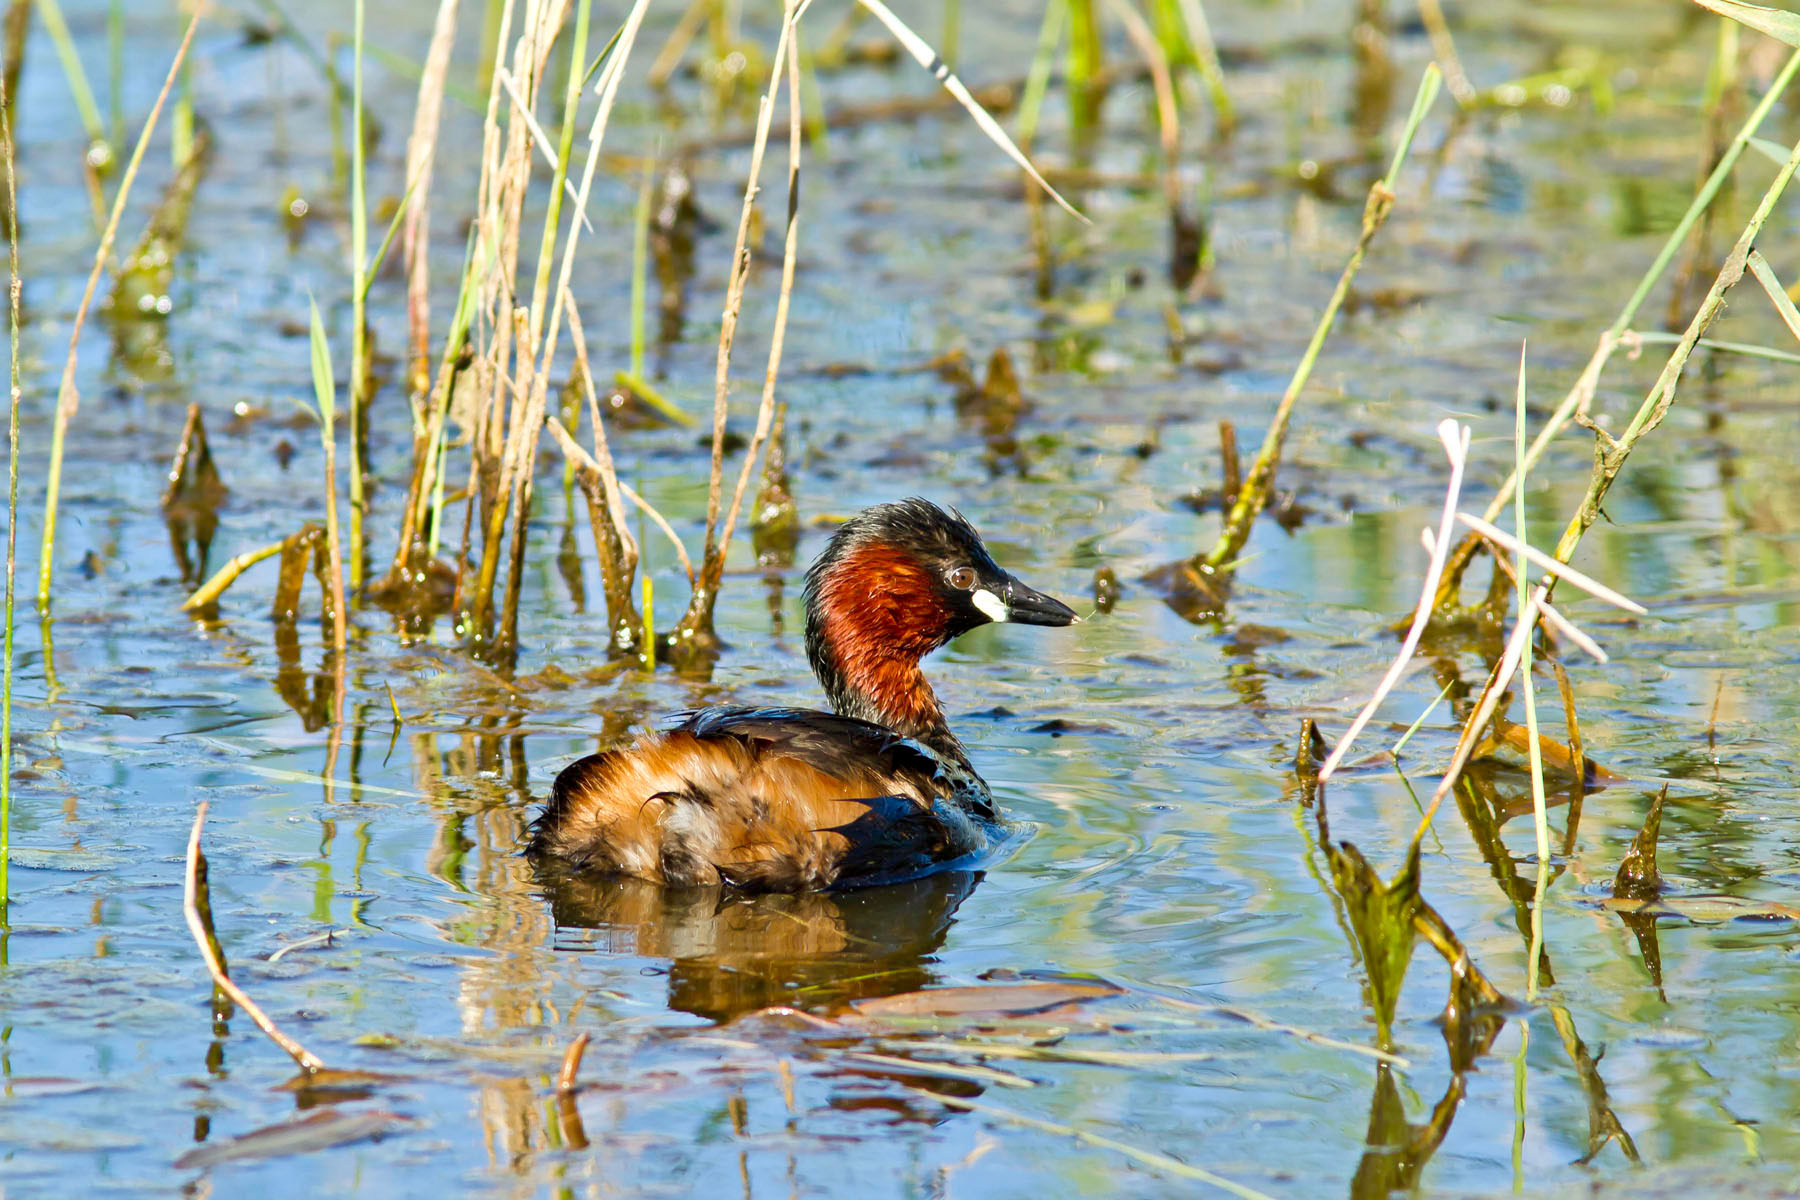 /Guewen/galeries/public/Nature/France/Grebes_Brenne/Grebes_010.jpg